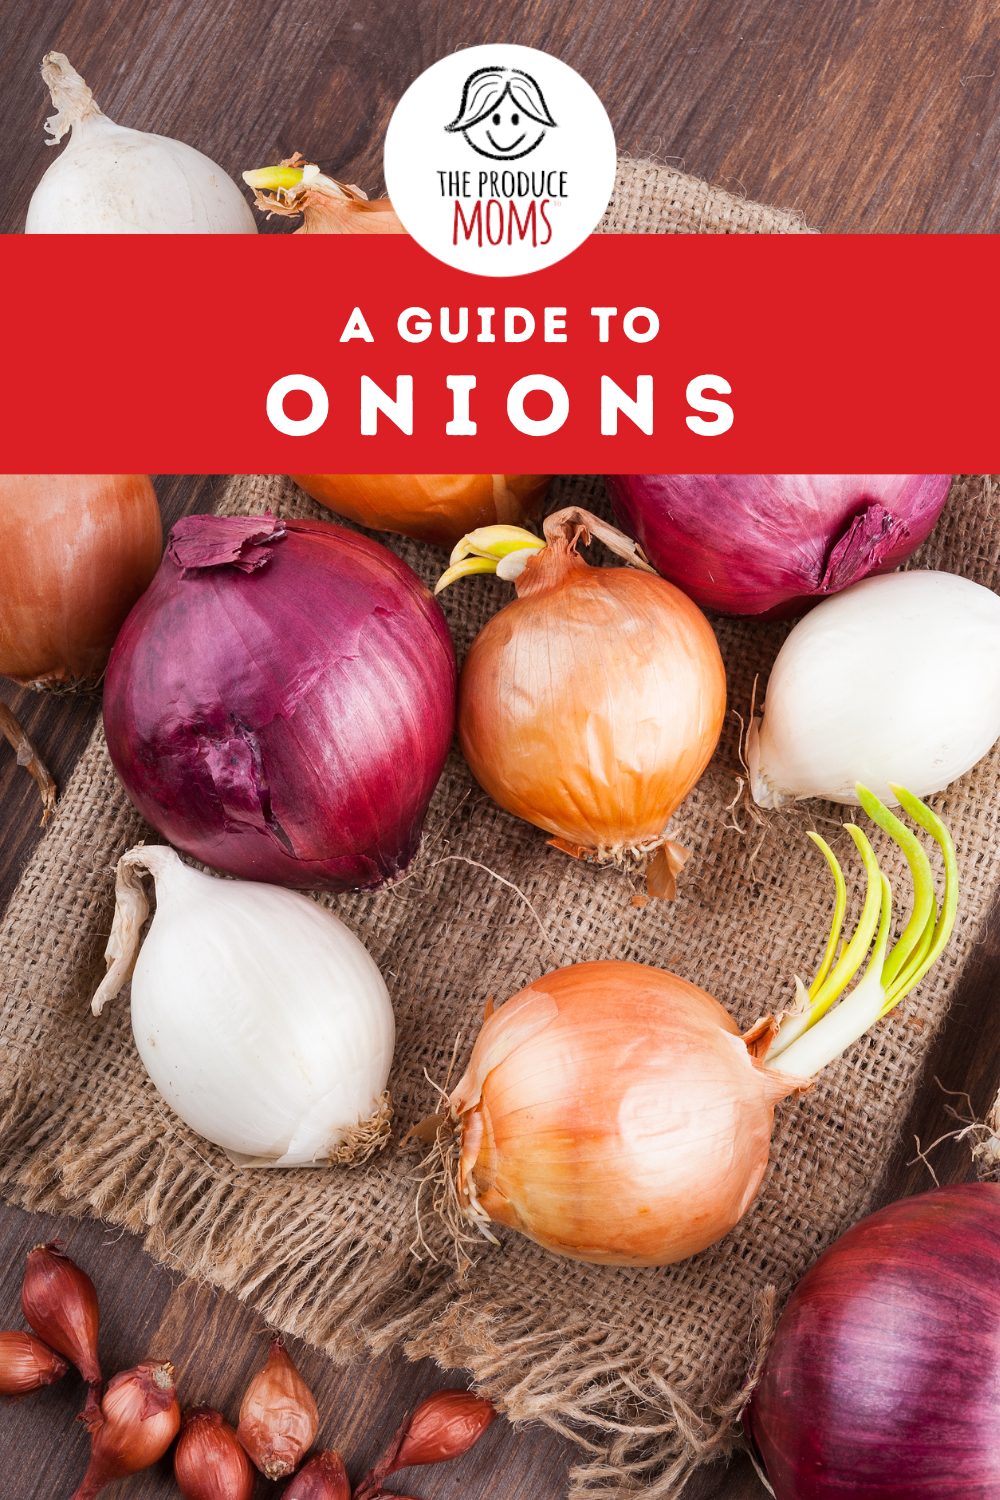 Pinterest Pin: Guide to Onions